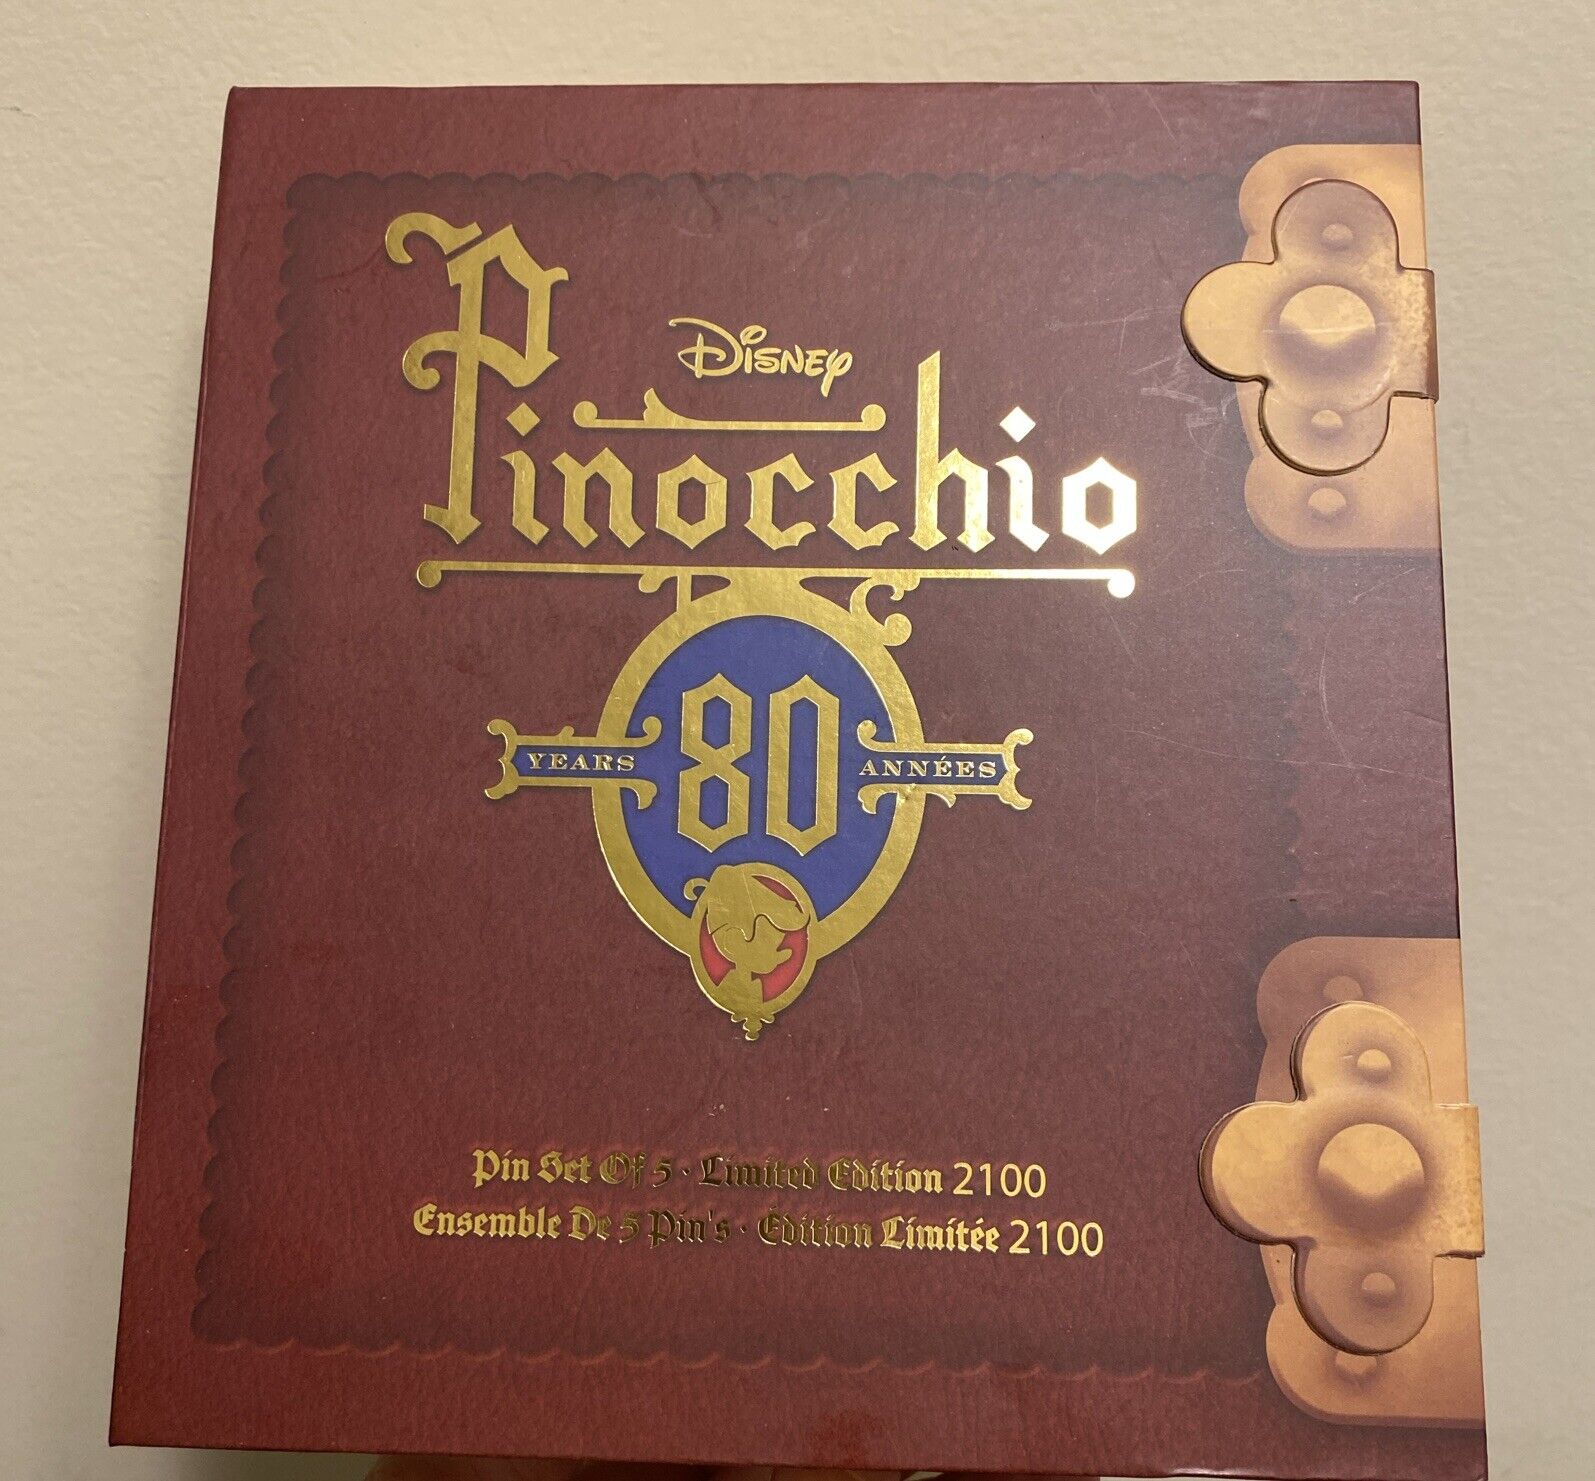 Disney Pinocchio Pin Set Limited Edition 5 Pins 80th Anniversary Boxed LE - NEW